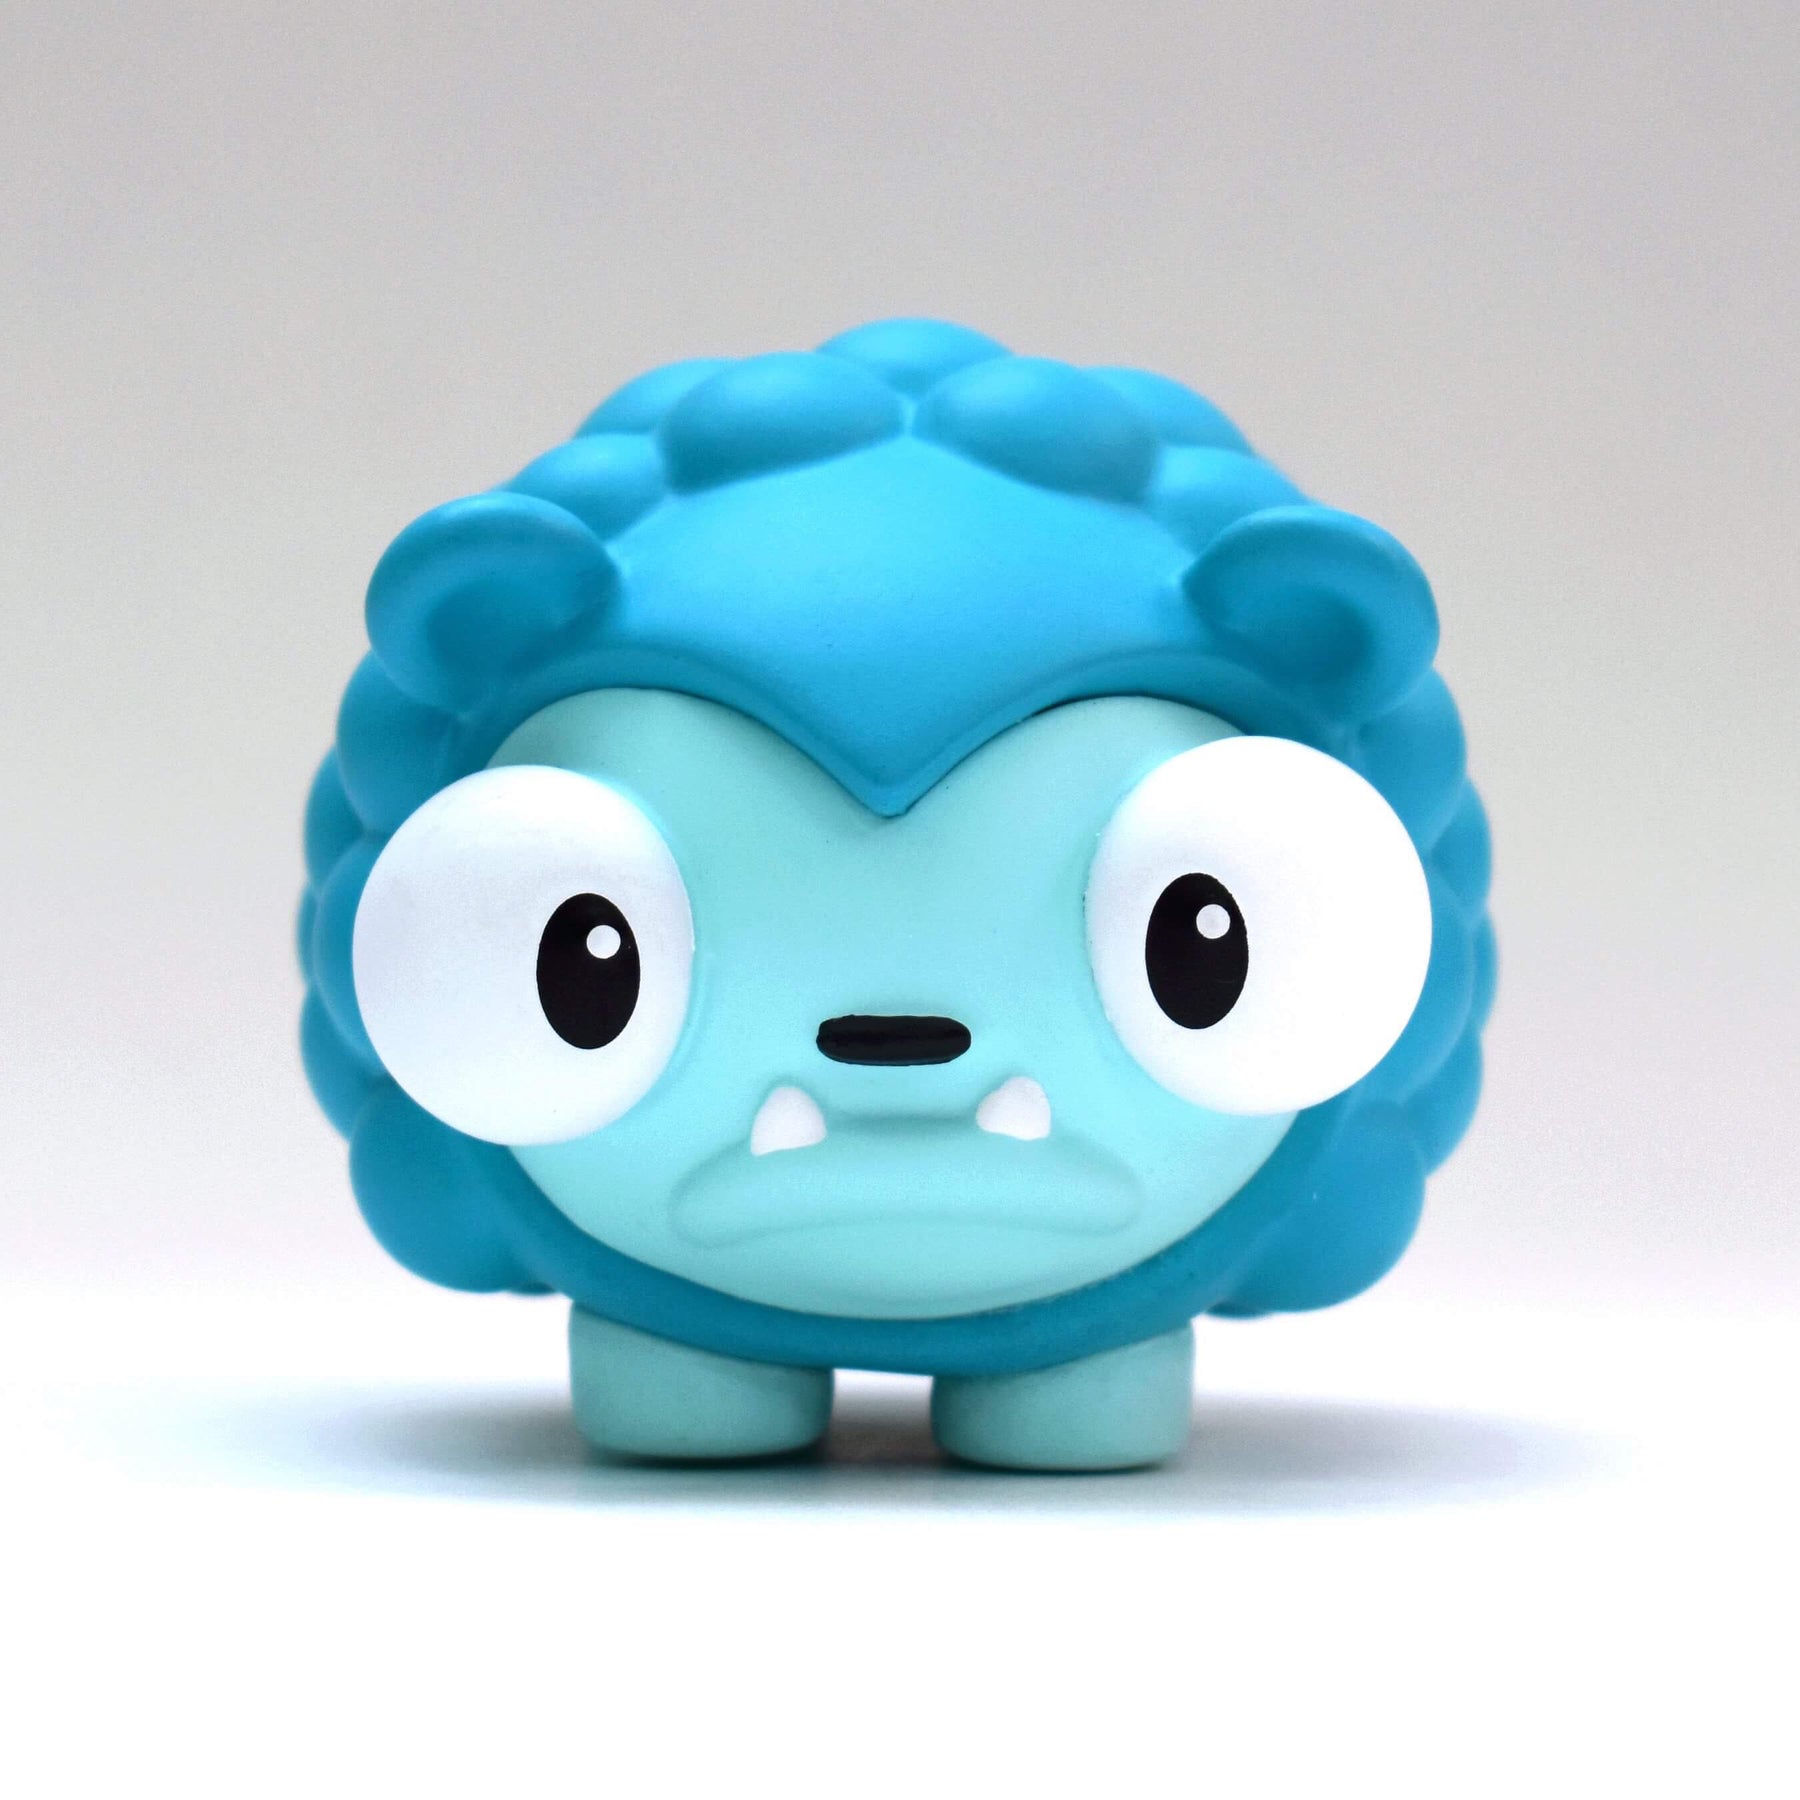 Bubbles Convention Exclusive 2" vinyl figure by The Bots & UVD Toys Available Now ! ! !